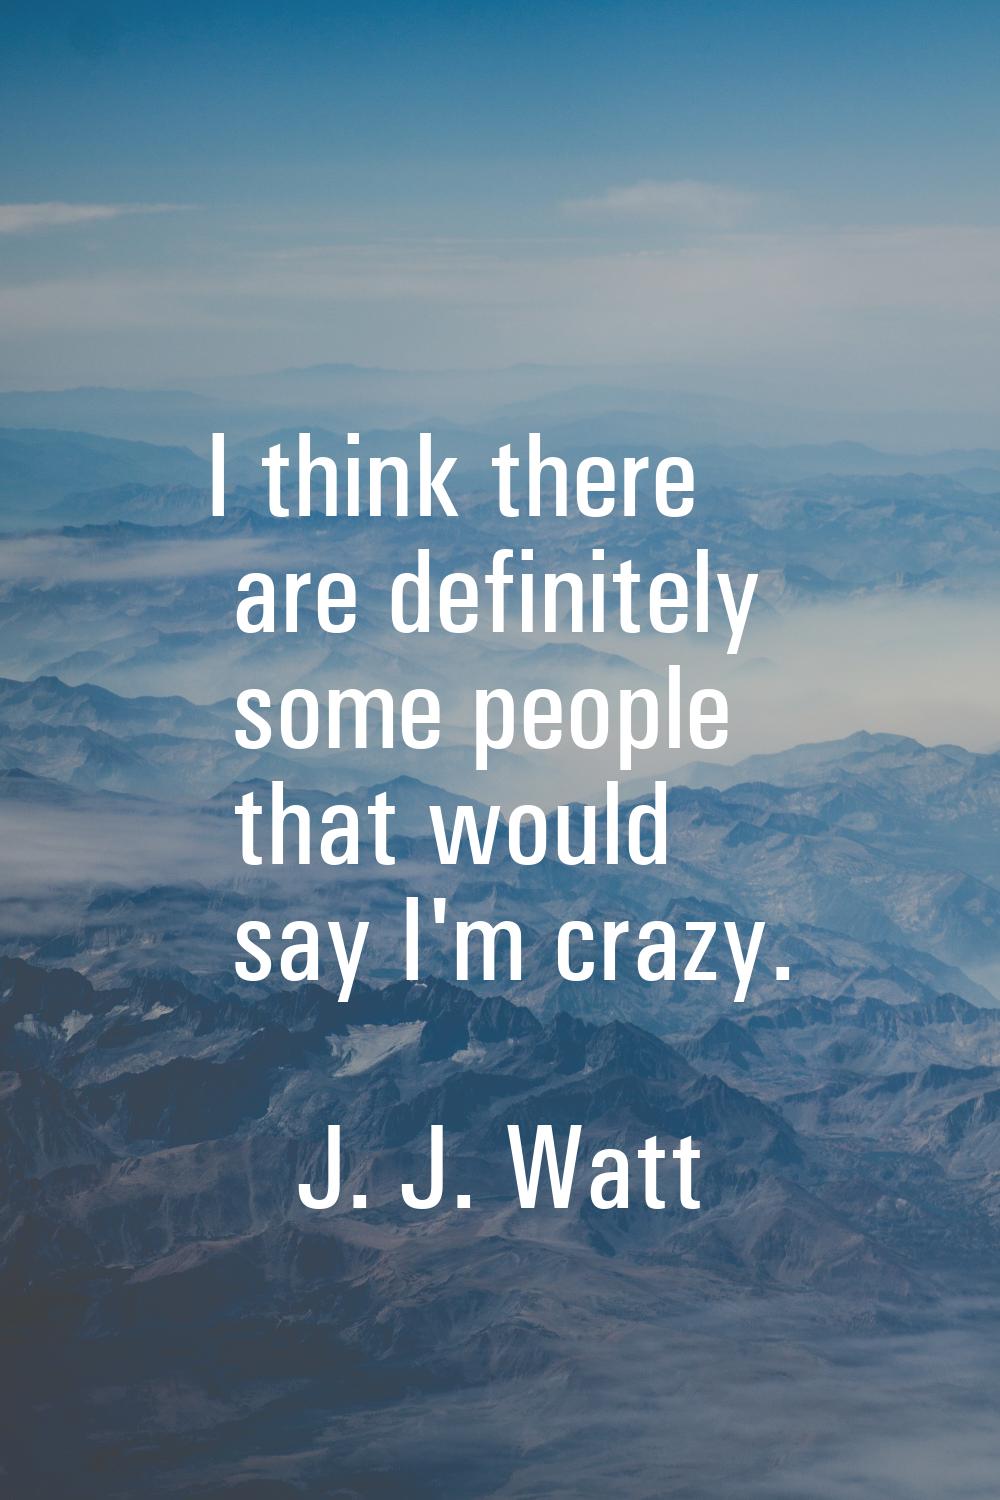 I think there are definitely some people that would say I'm crazy.